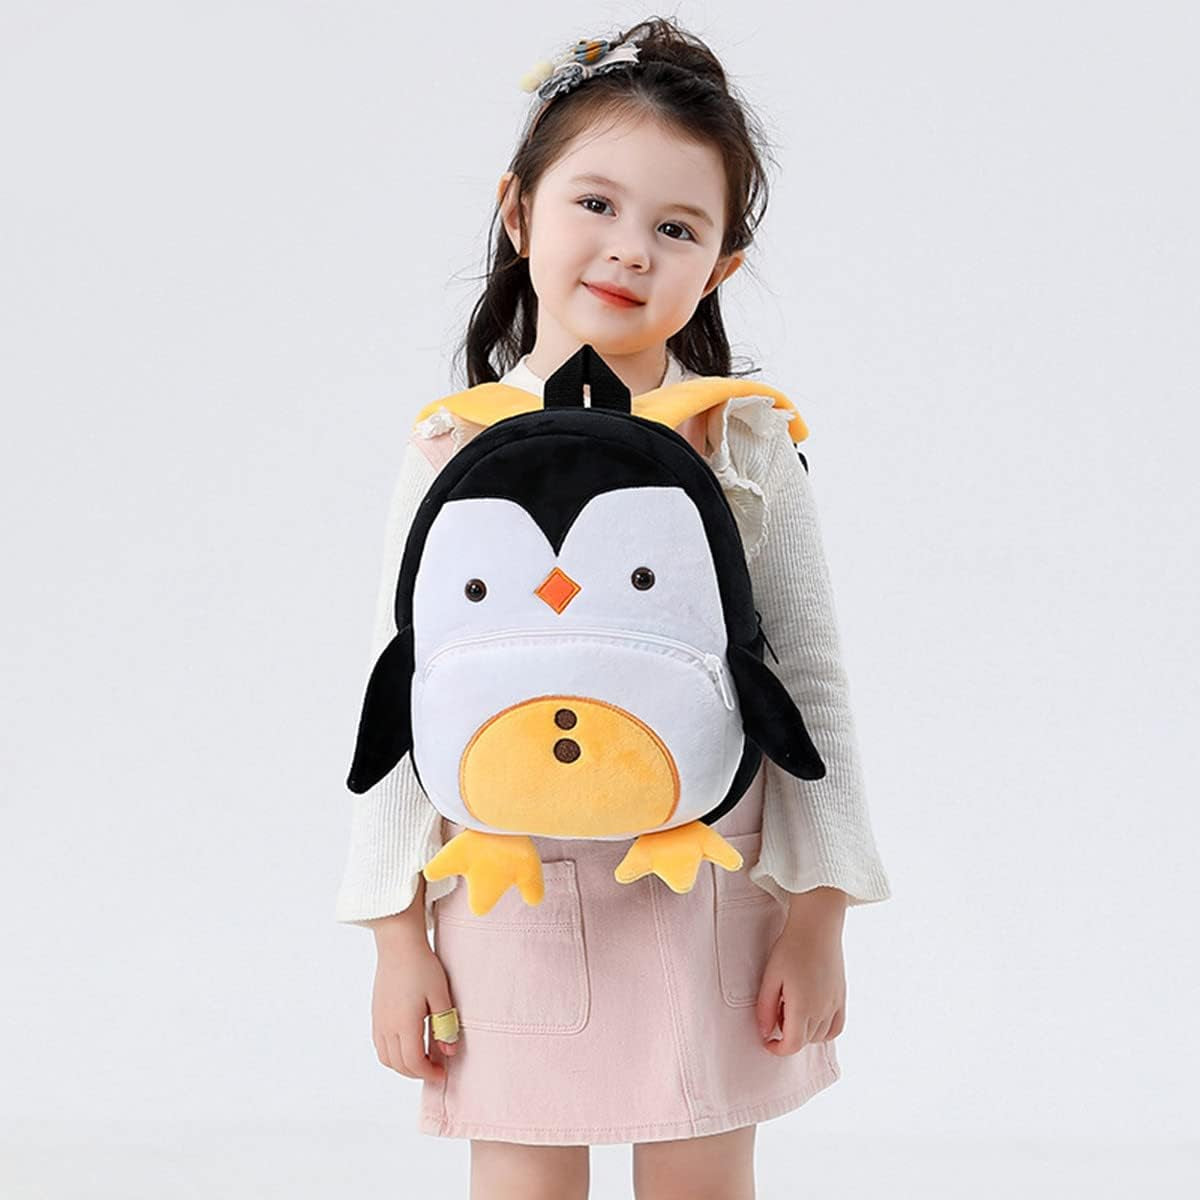 Toddler Backpack for Boys and Girls, Cute Soft Plush Animal Cartoon Mini Backpack Little for Kids 2-6 Years (Watermelon)